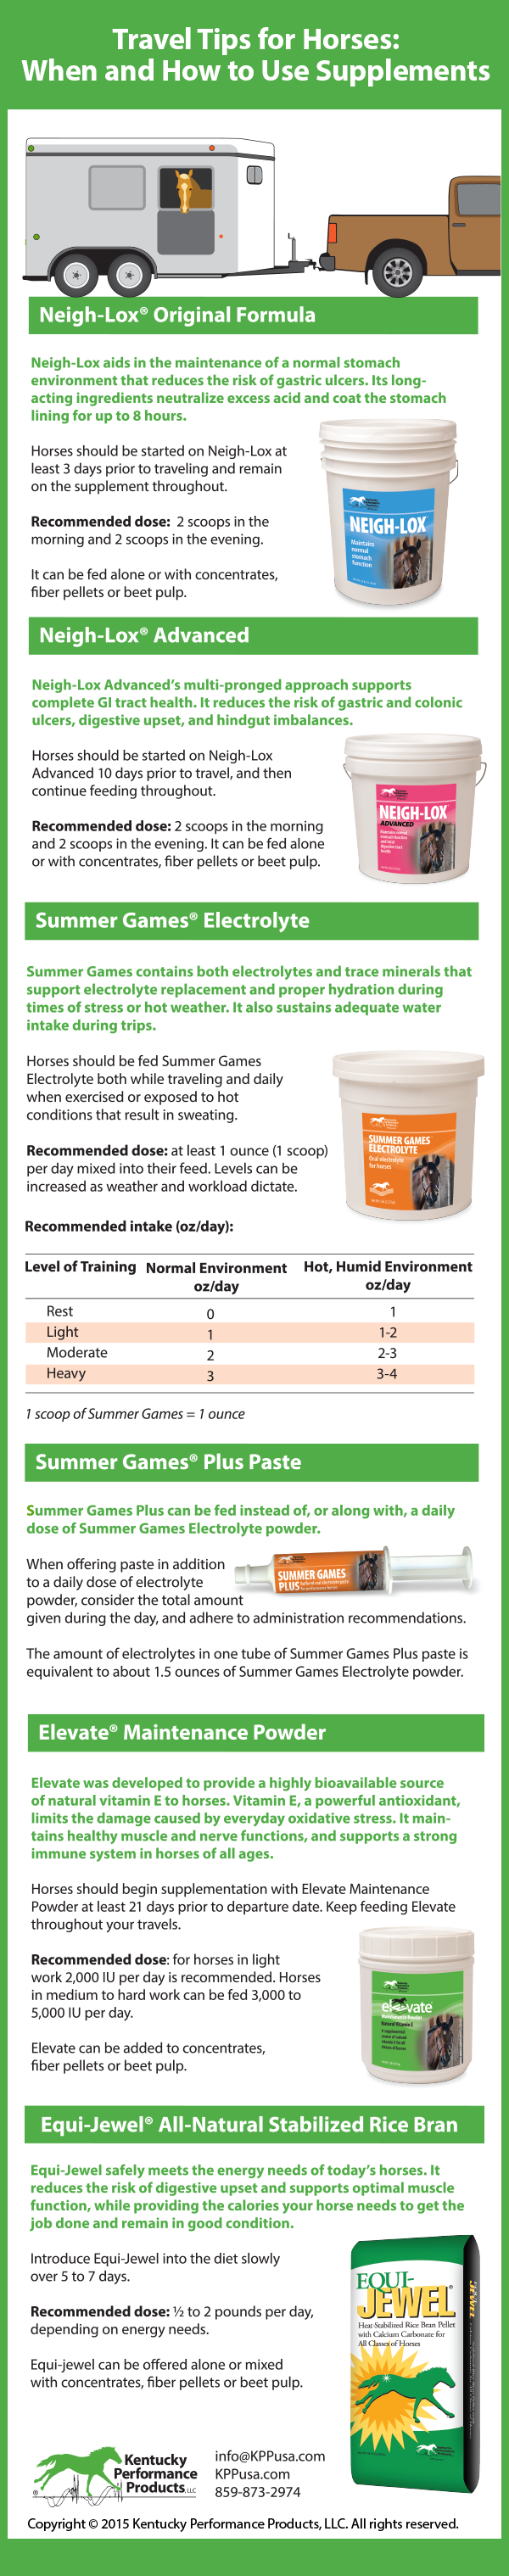 Travel Tips for Horses – Part 3: How and When to Use Supplements